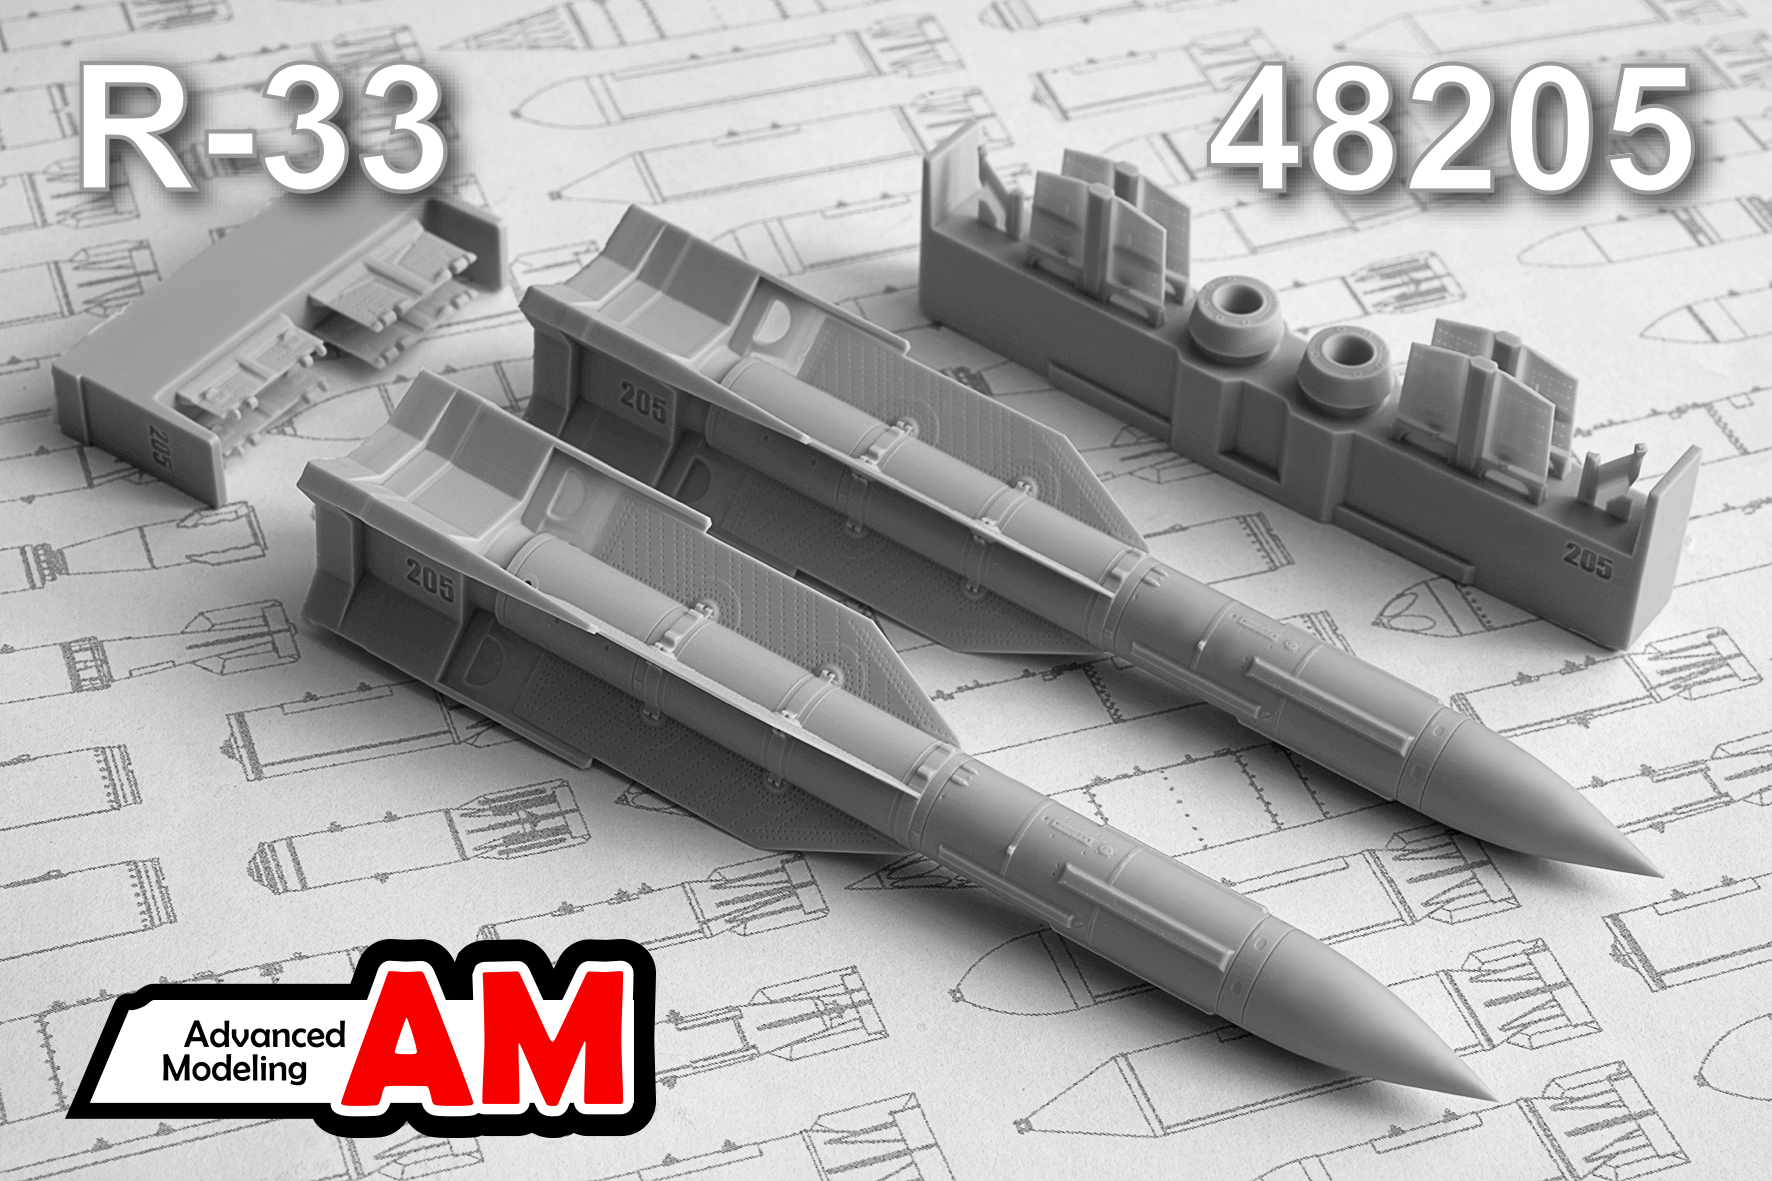 Additions (3D resin printing) 1/48 R-33 Air to Air missile (Advanced Modeling) 